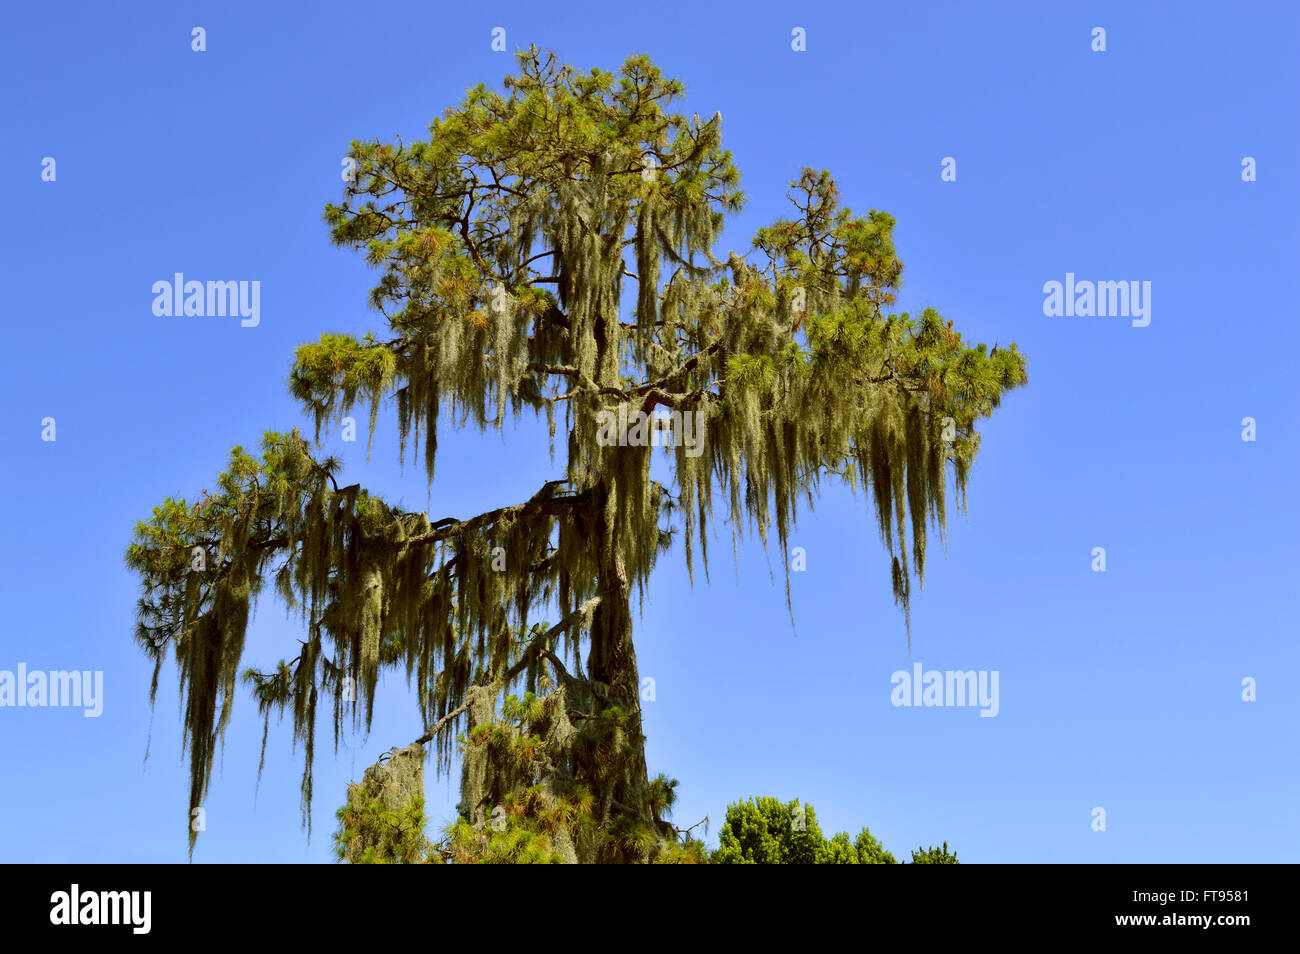 Swamp cypress with Spanish moss growing on it Stock Photo